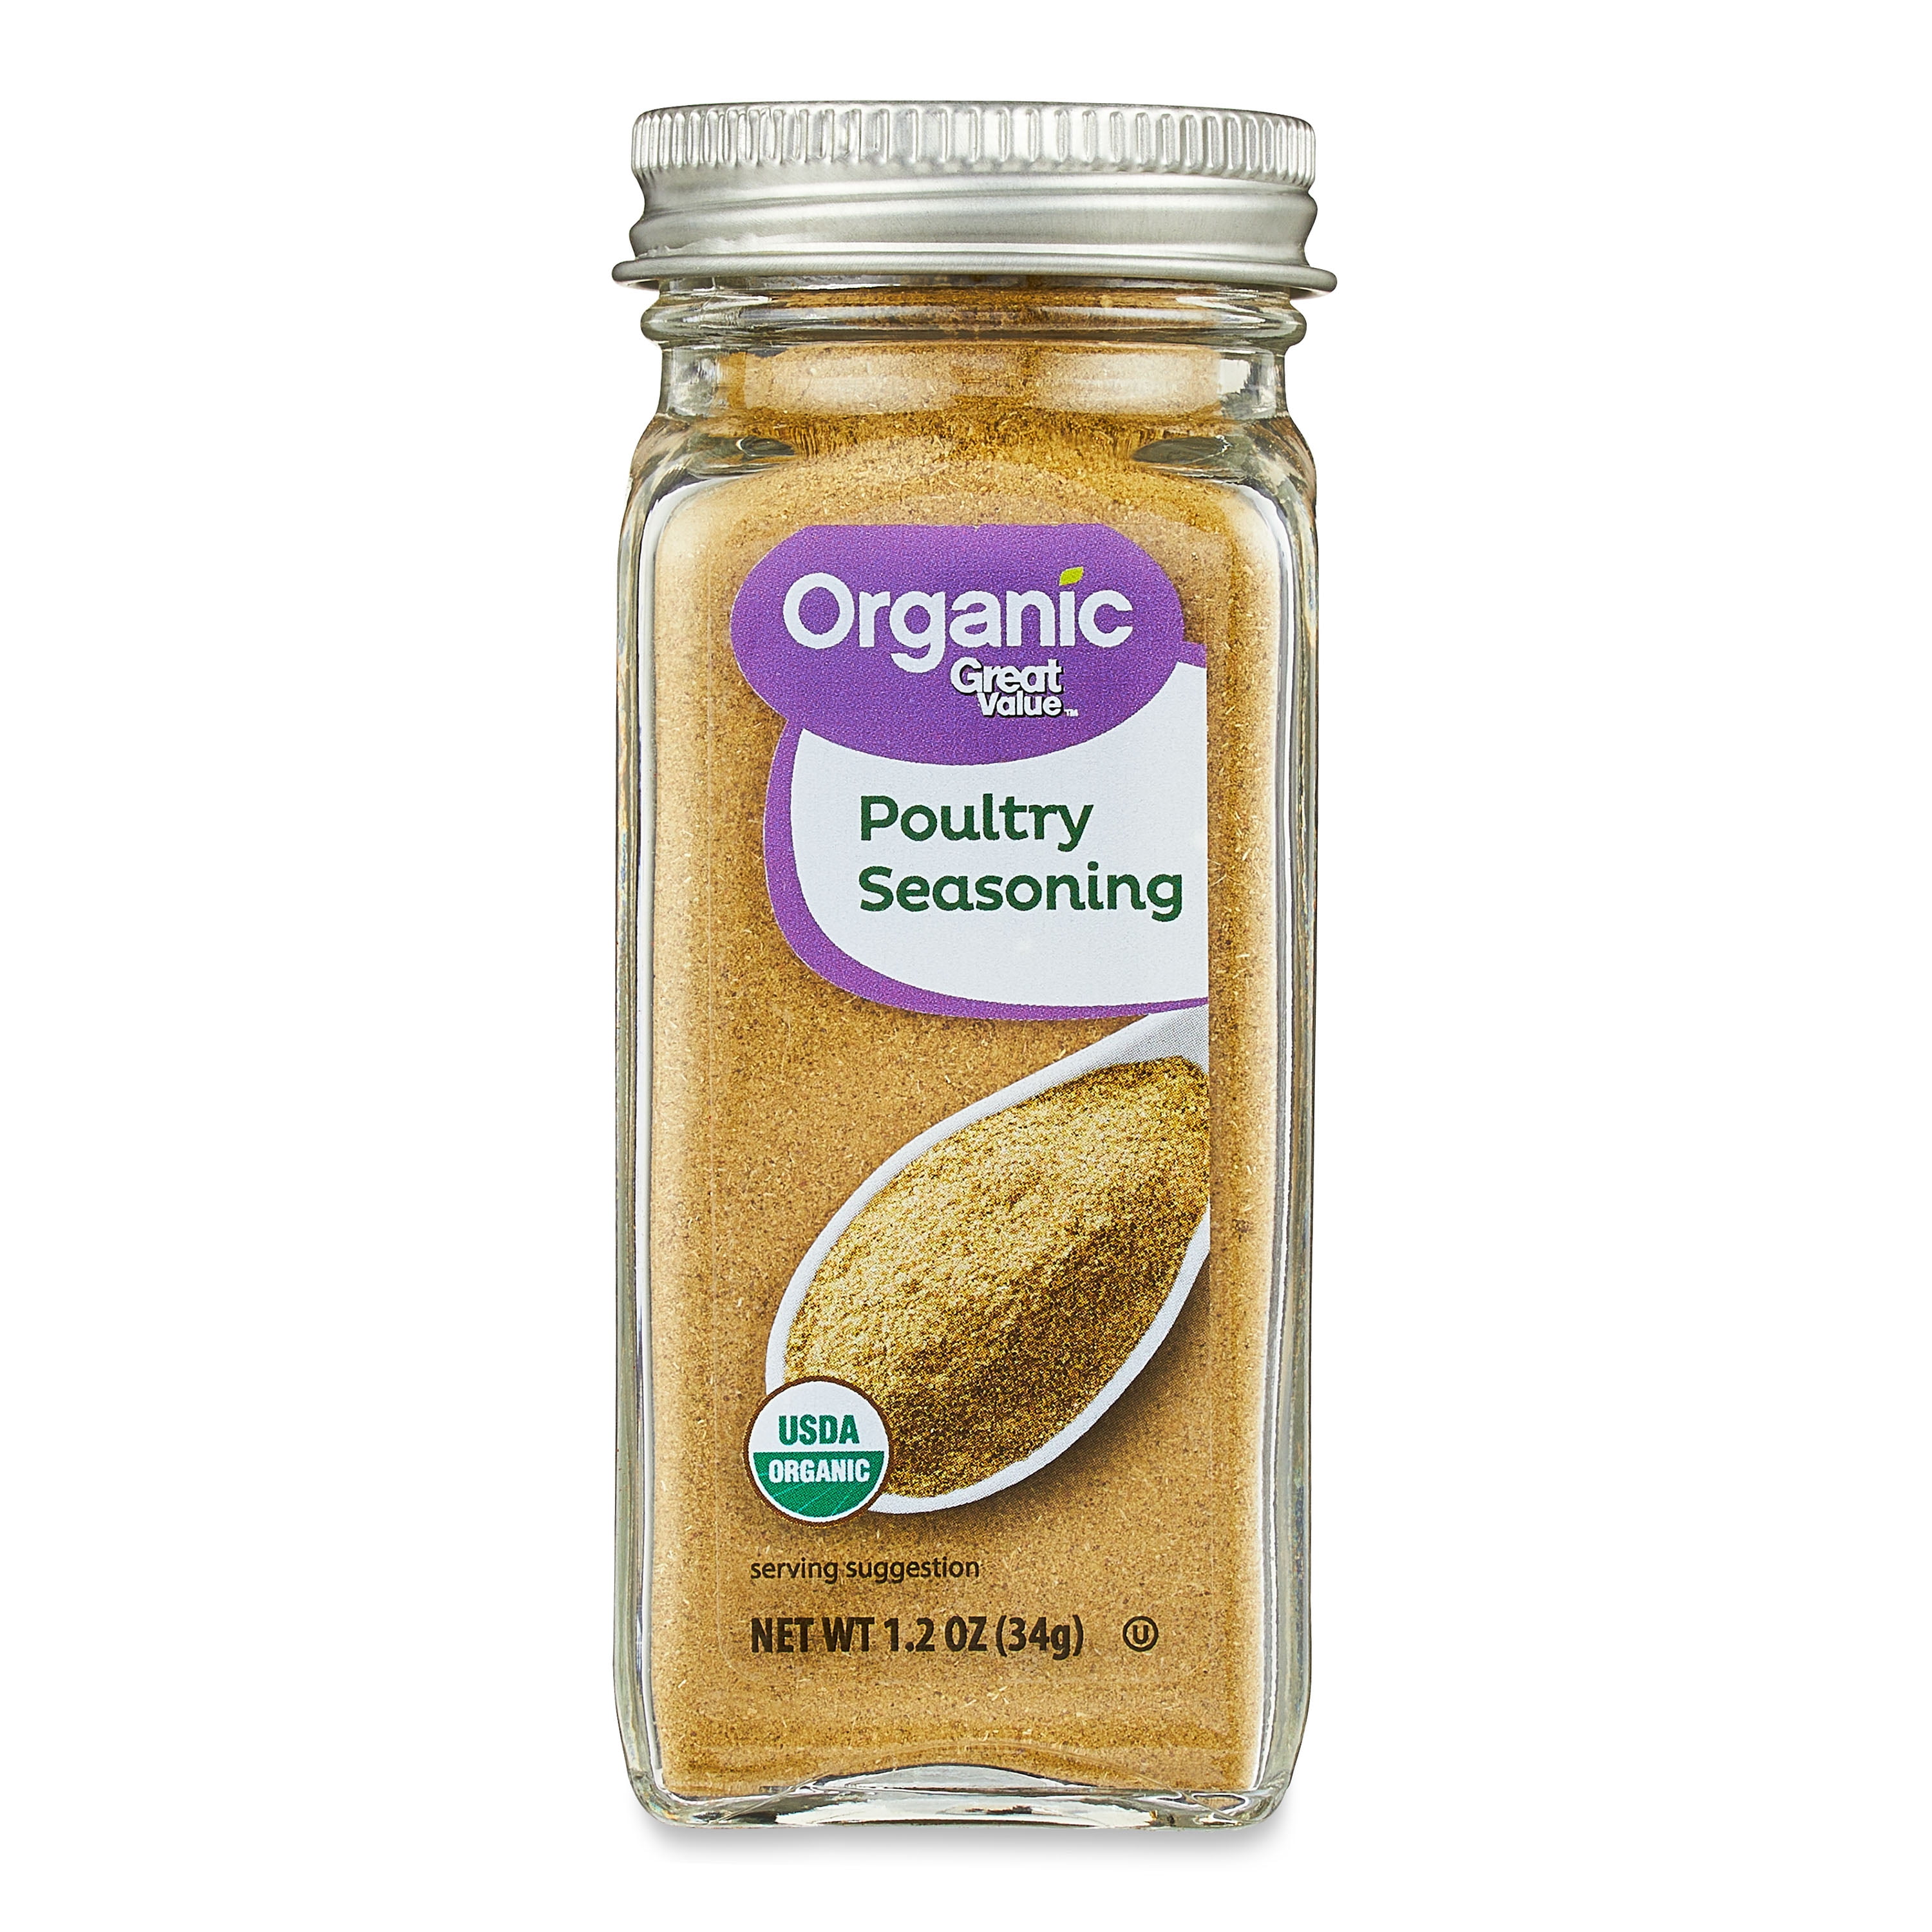 Great Value Organic Poultry Seasoning - 1.2 oz